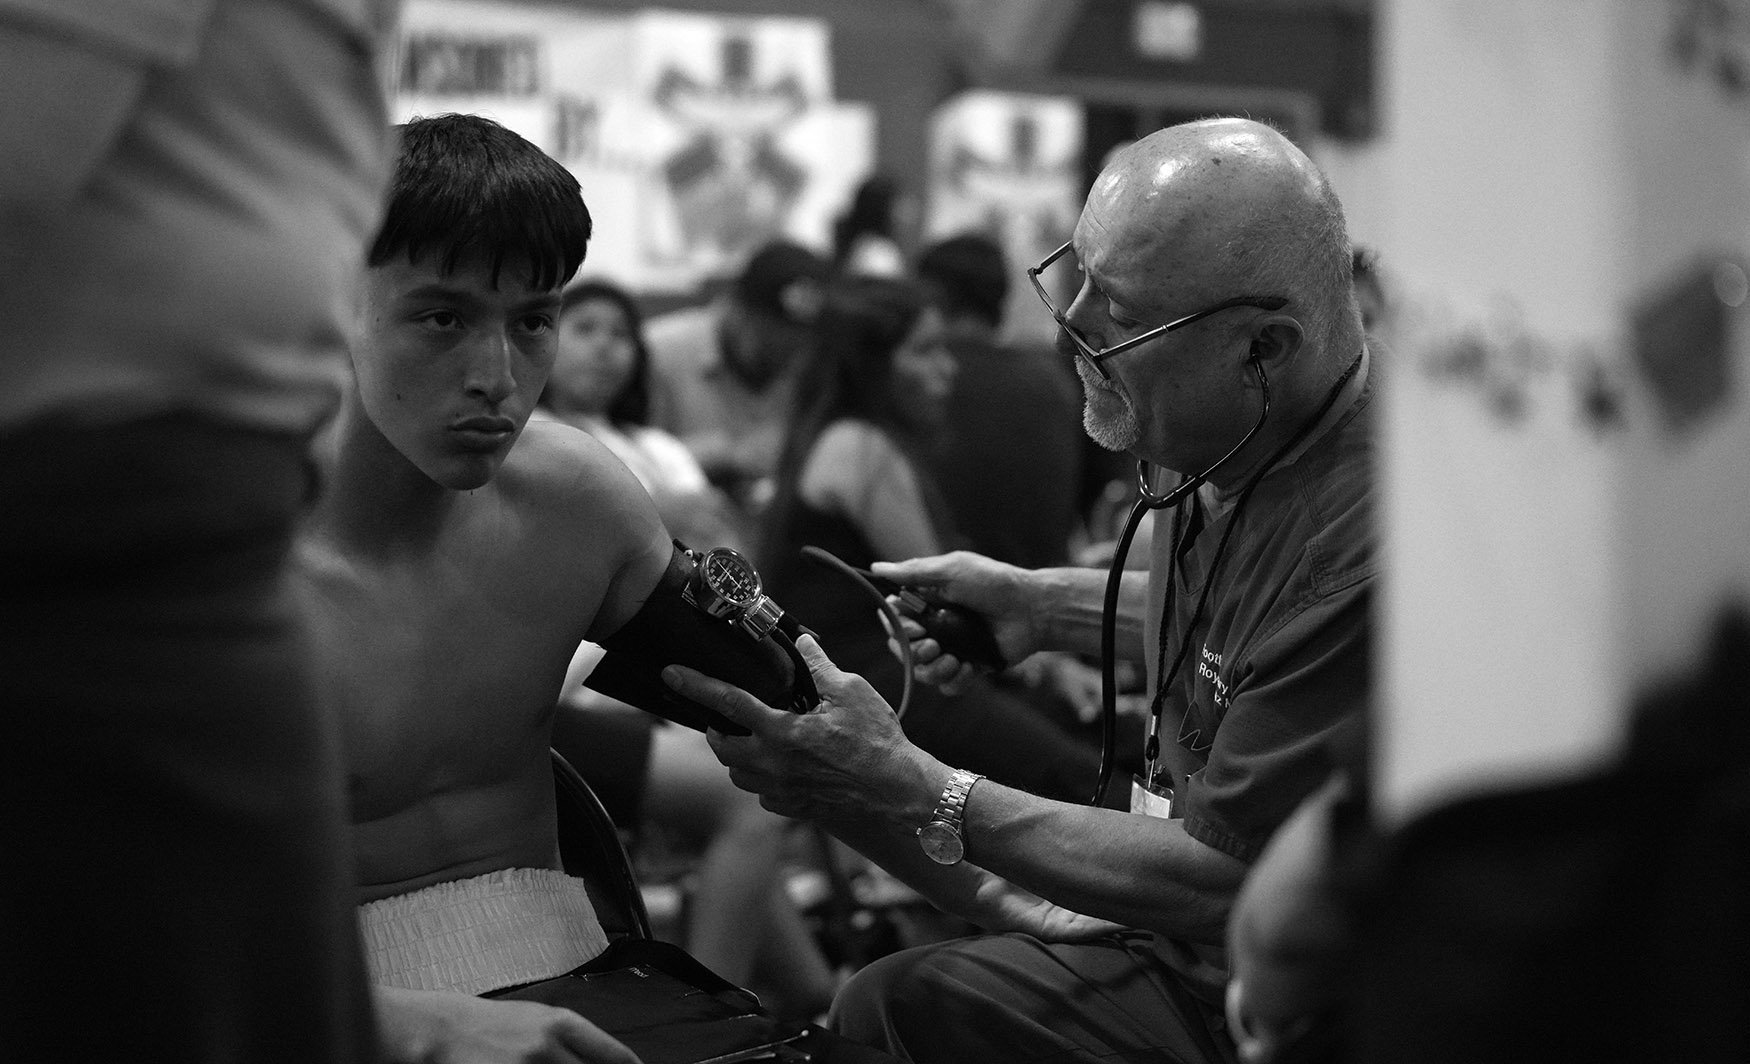  Medical staff checks out a boxer prior to a bout during the annual amateur boxing show staged by the Duarte Boxing Club at Duarte High School in Duarte on Saturday, August 13, 2022.  